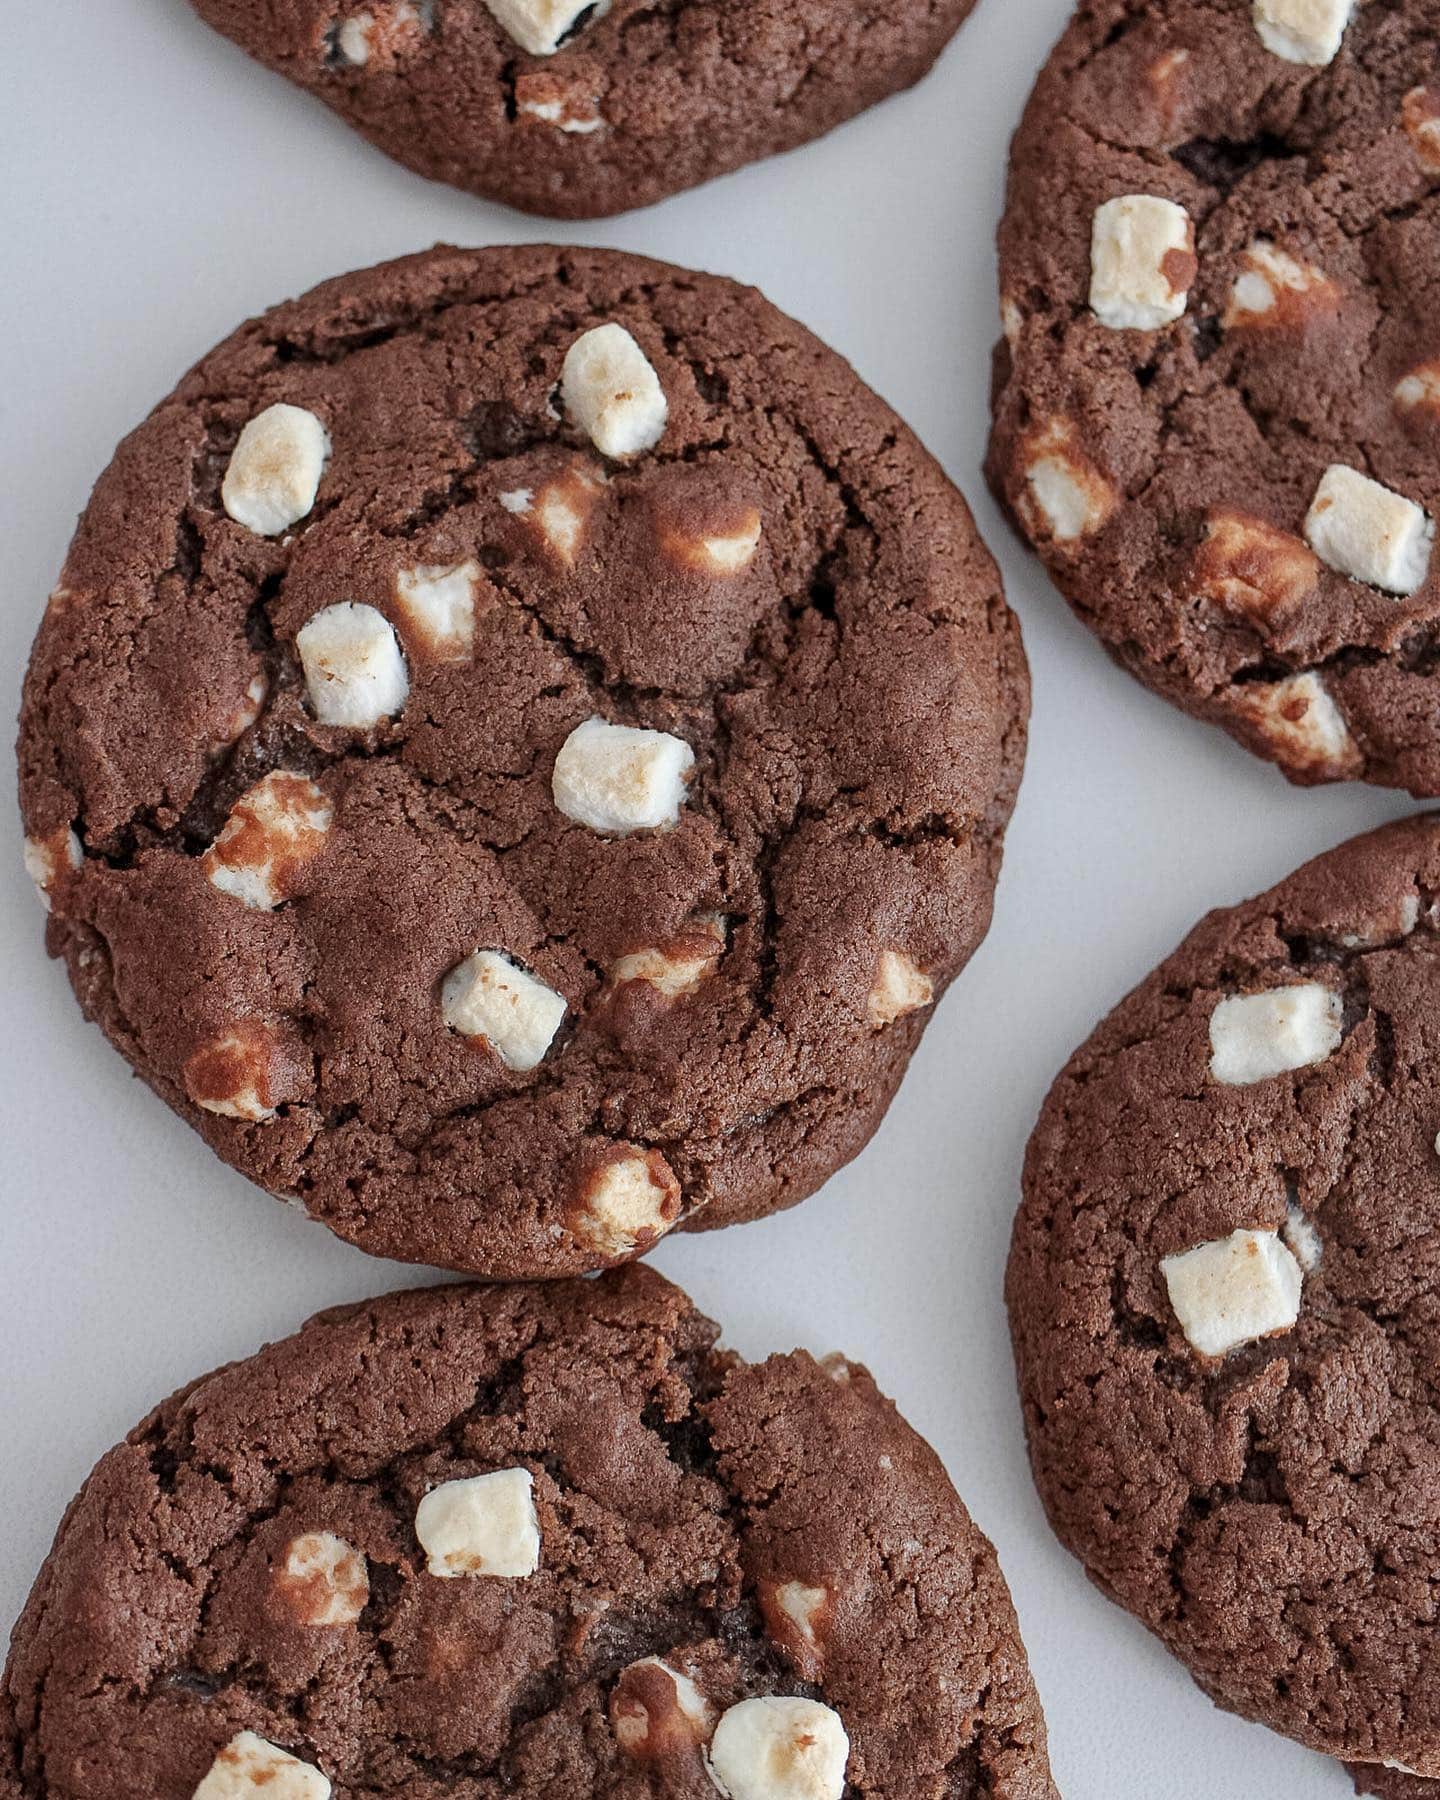 Hot cocoa cookies are the best winter/holiday cookies. The recipe is on my blog. 

#hotcocoacookies #hotchocolatecookies #cookierecipe #holidaycookies #holidaycookierecipe